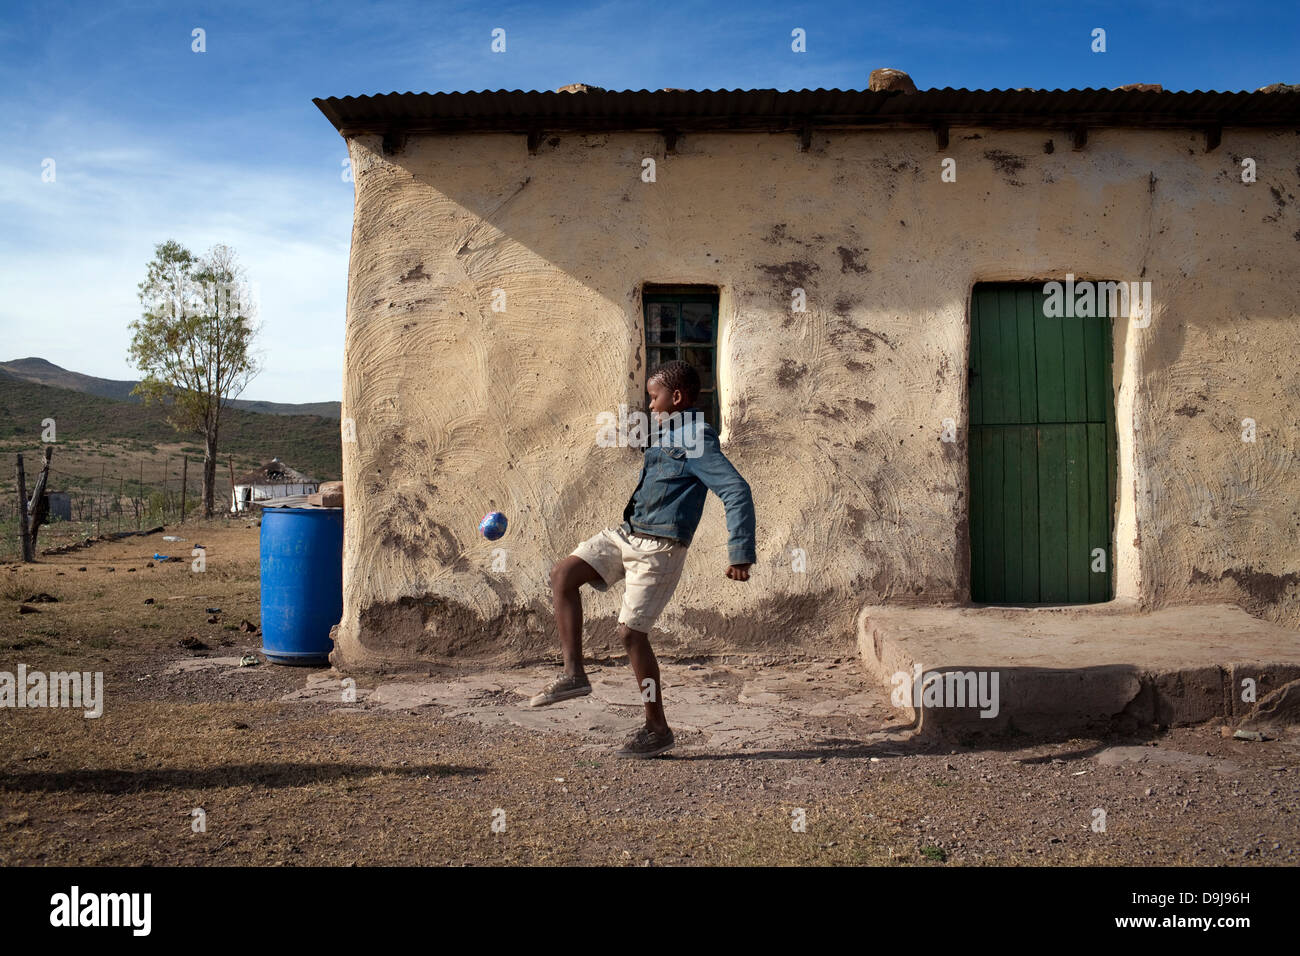 Young boy practices his football skills using a makeshift soccer ball in rural Transkei, South Africa Stock Photo